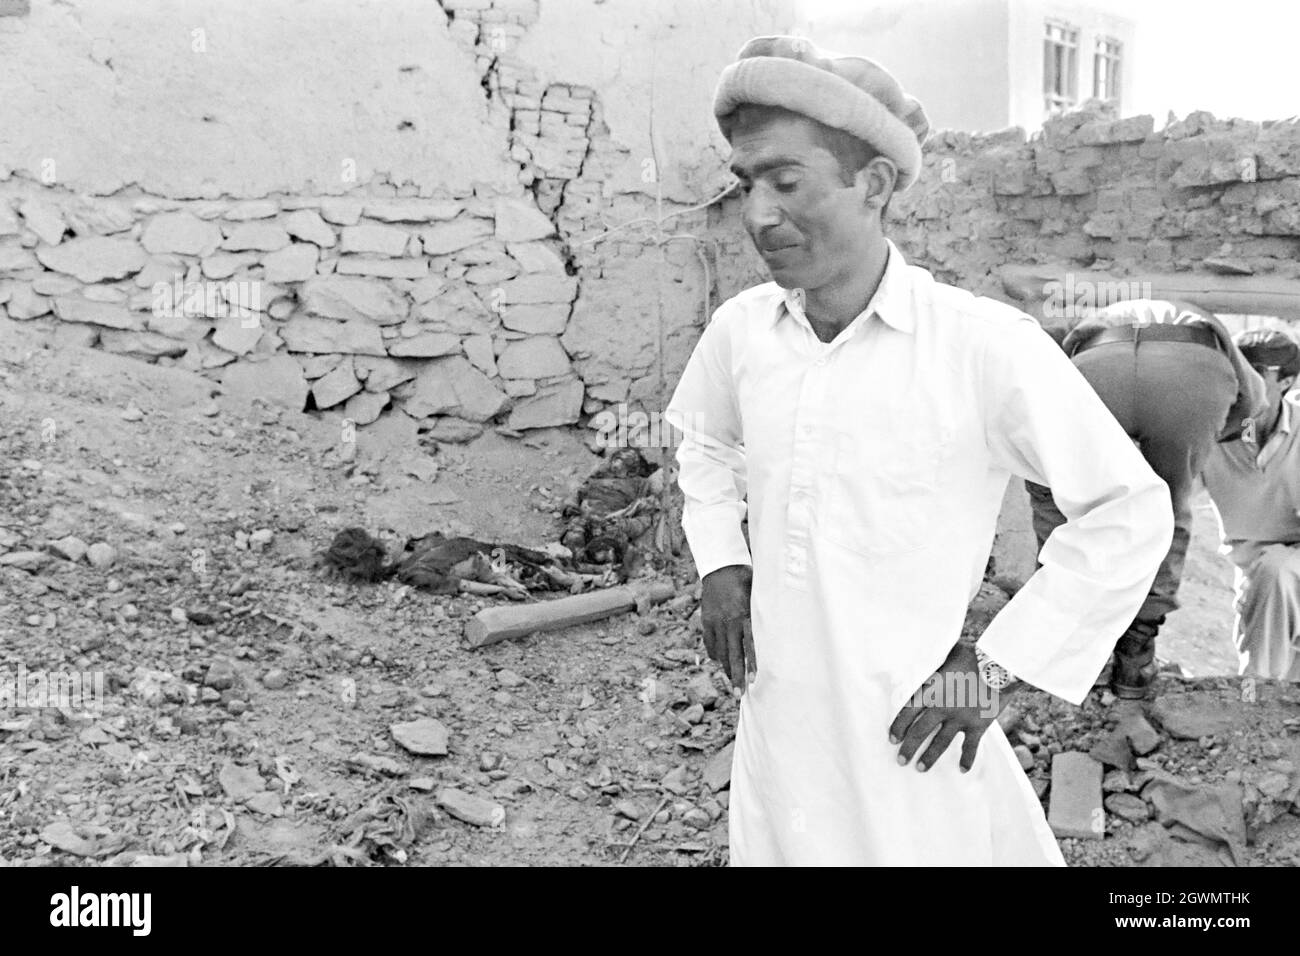 KABUL, AFGHANISTAN. 16th April 1988. An Afghan father turns away from the carnage after seeing his two daughters killed in a rocket attack in the residential neighborhood of Karte-Ye-Sakhi April 16, 1988 in Kabul, Afghanistan. The rocket, fired by the Afghan mujahideen killed two young sisters playing in a courtyard. Stock Photo